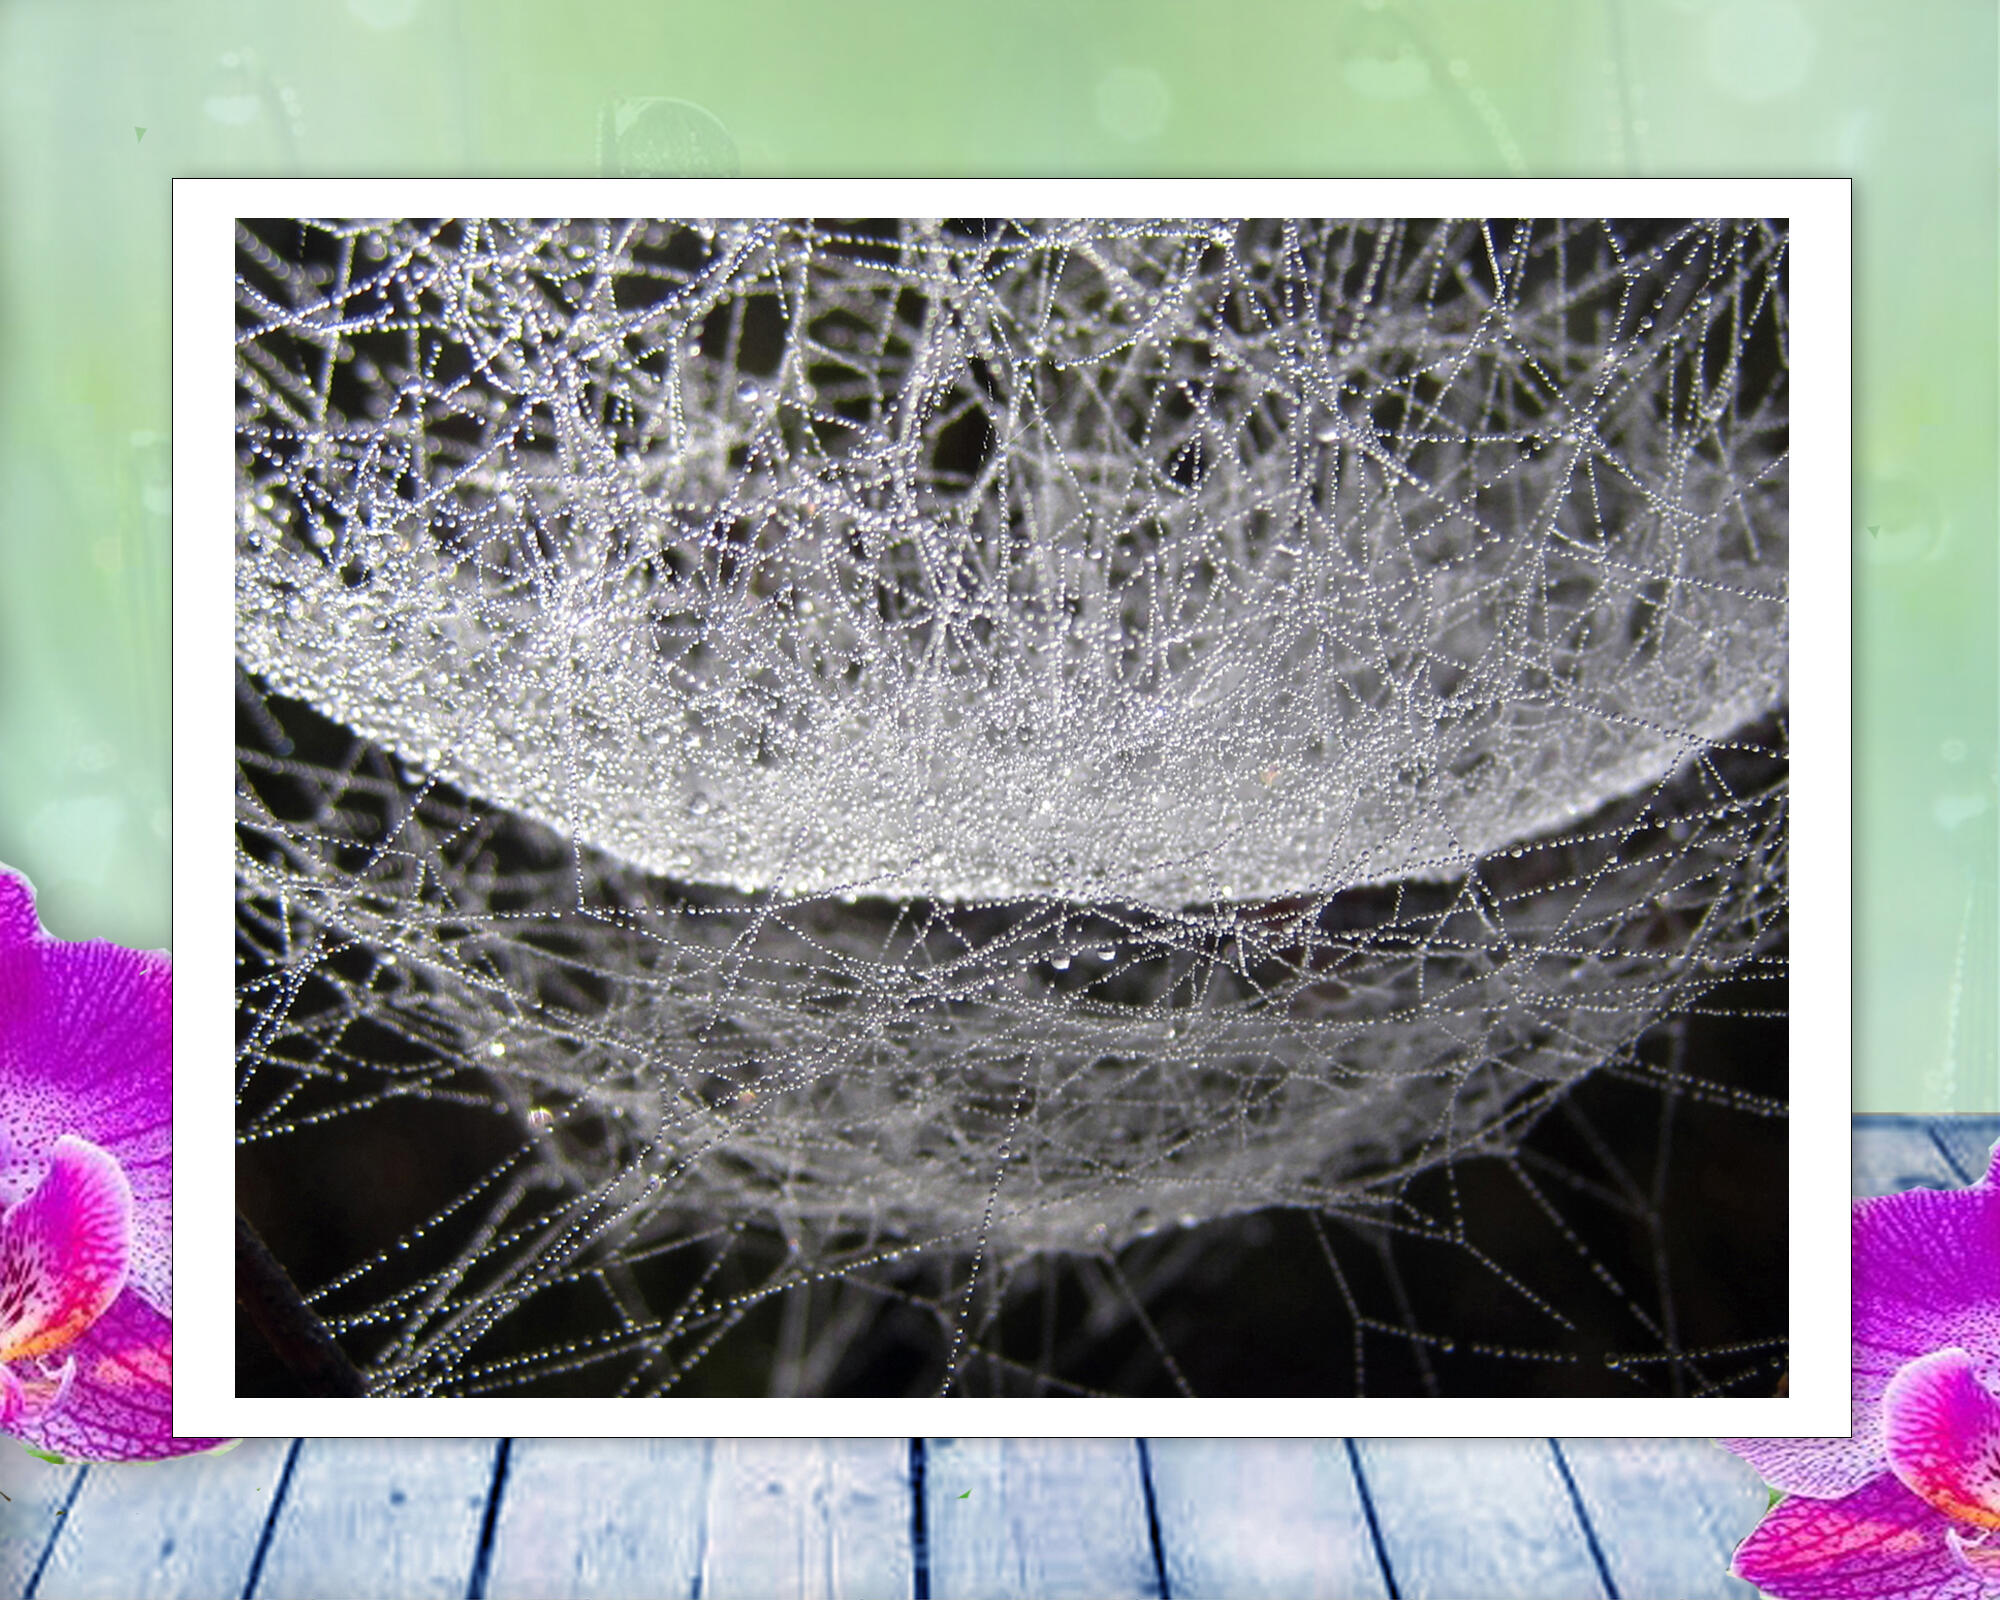 A dew covered spider web becomes a water hammock in this soothing, peaceful nature photo with Poem - Spider Hammock by The Poetry of NatureA dew covered spider web becomes a water hammock in this soothing, peaceful nature photo with Poem - Spider Hammock by The Poetry of Nature